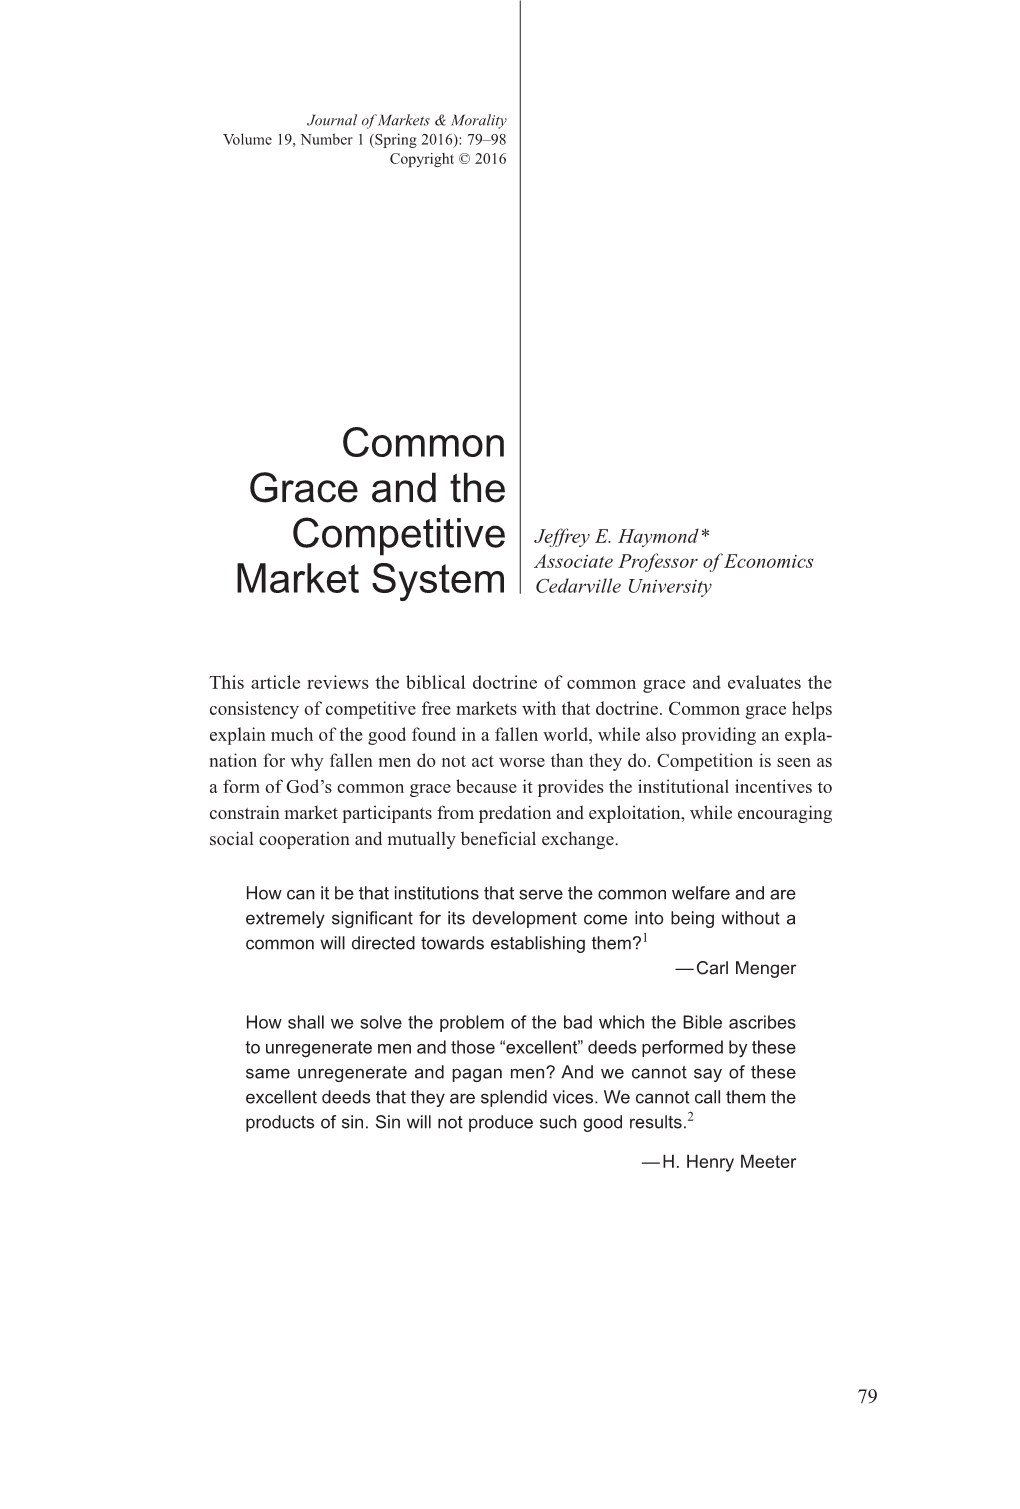 Common Grace and the Competitive Market System